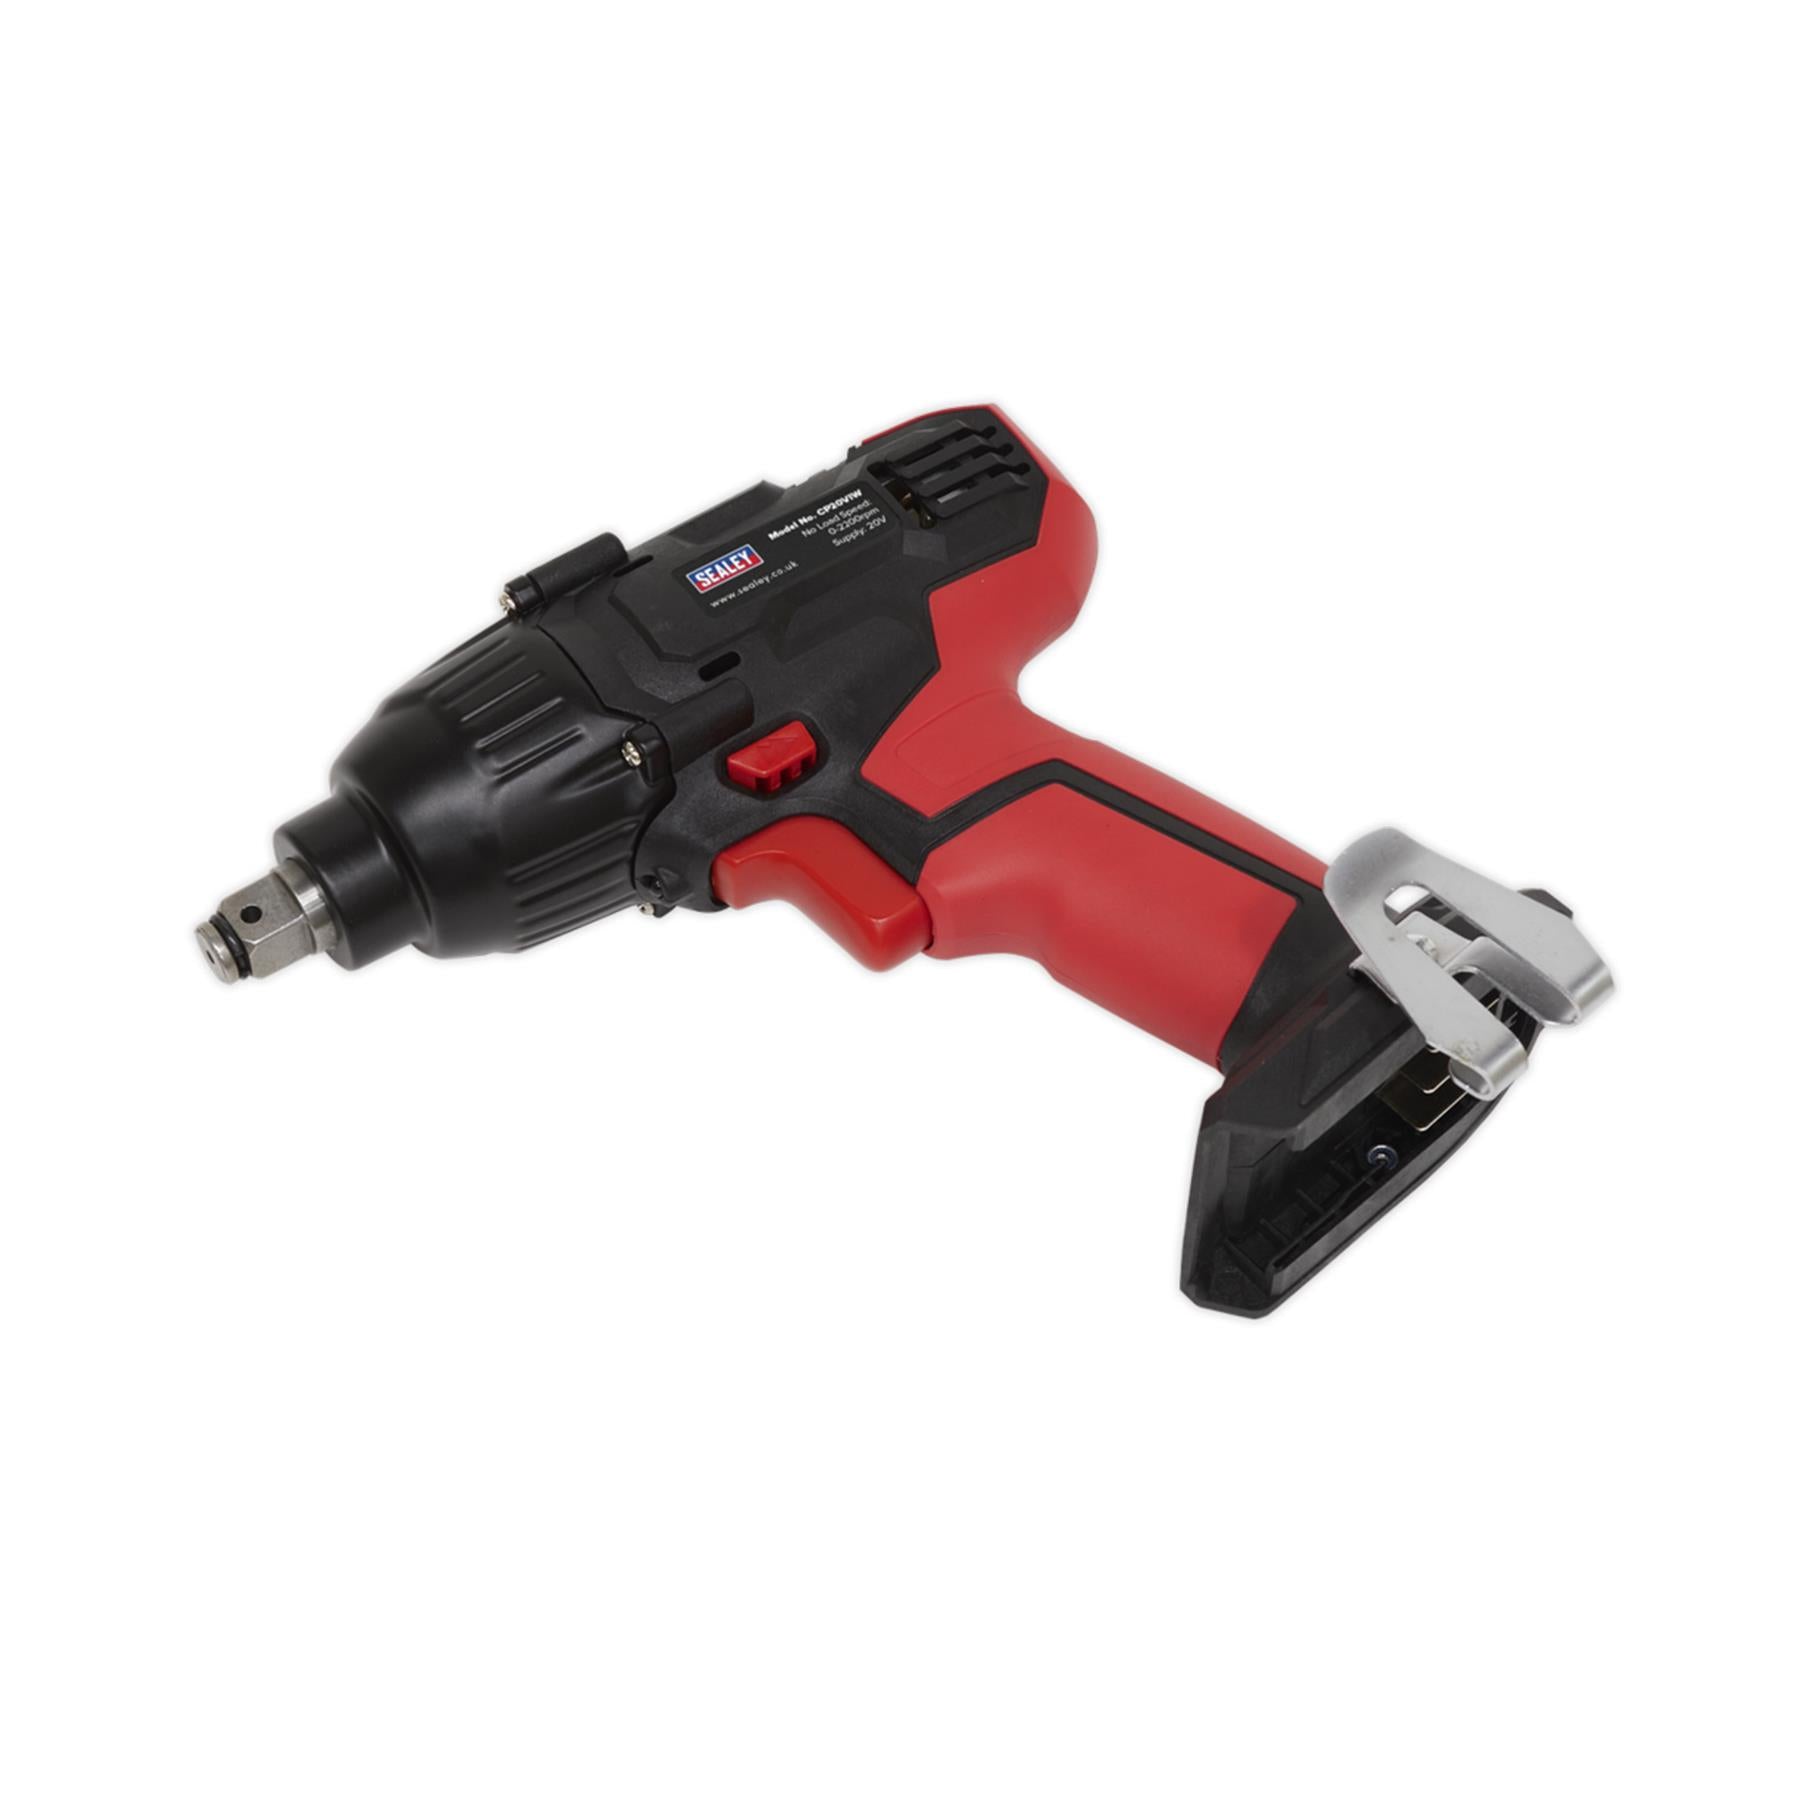 Sealey Impact Wrench 20V 1/2"Sq Drive 230Nm - Body Only